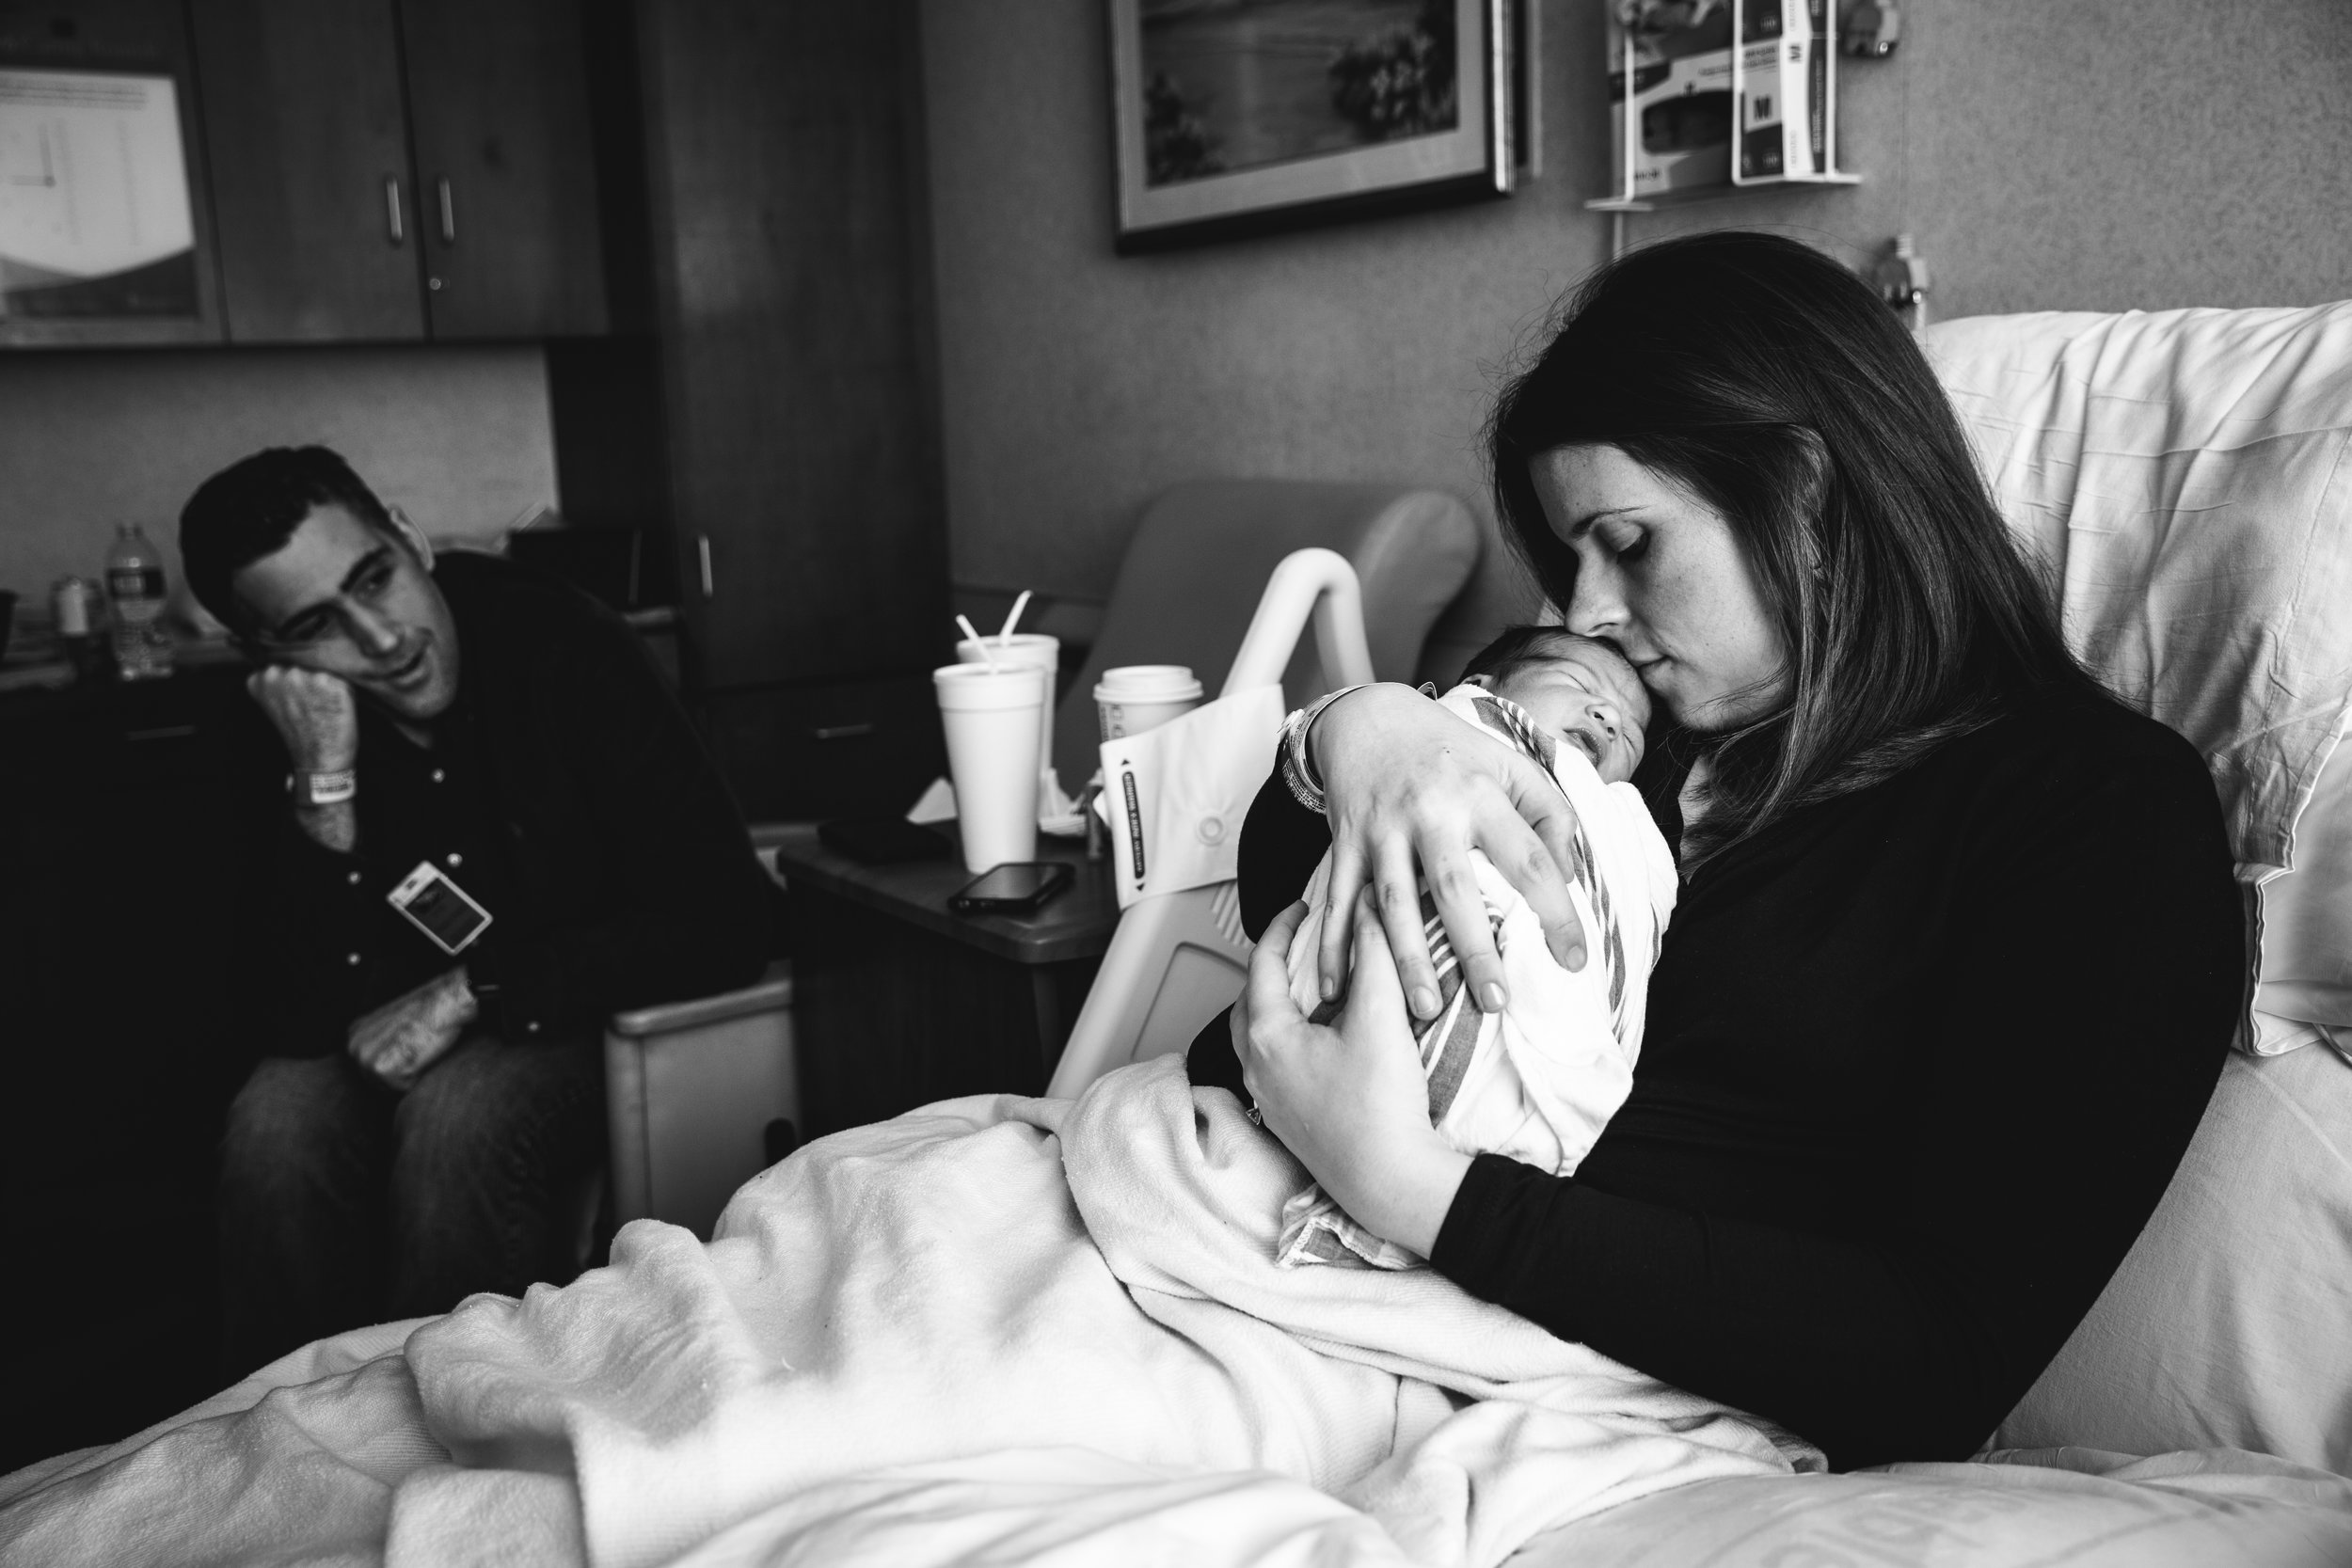 new mother snuggles and kisses infant son in hospital while baby's father looks on in background.